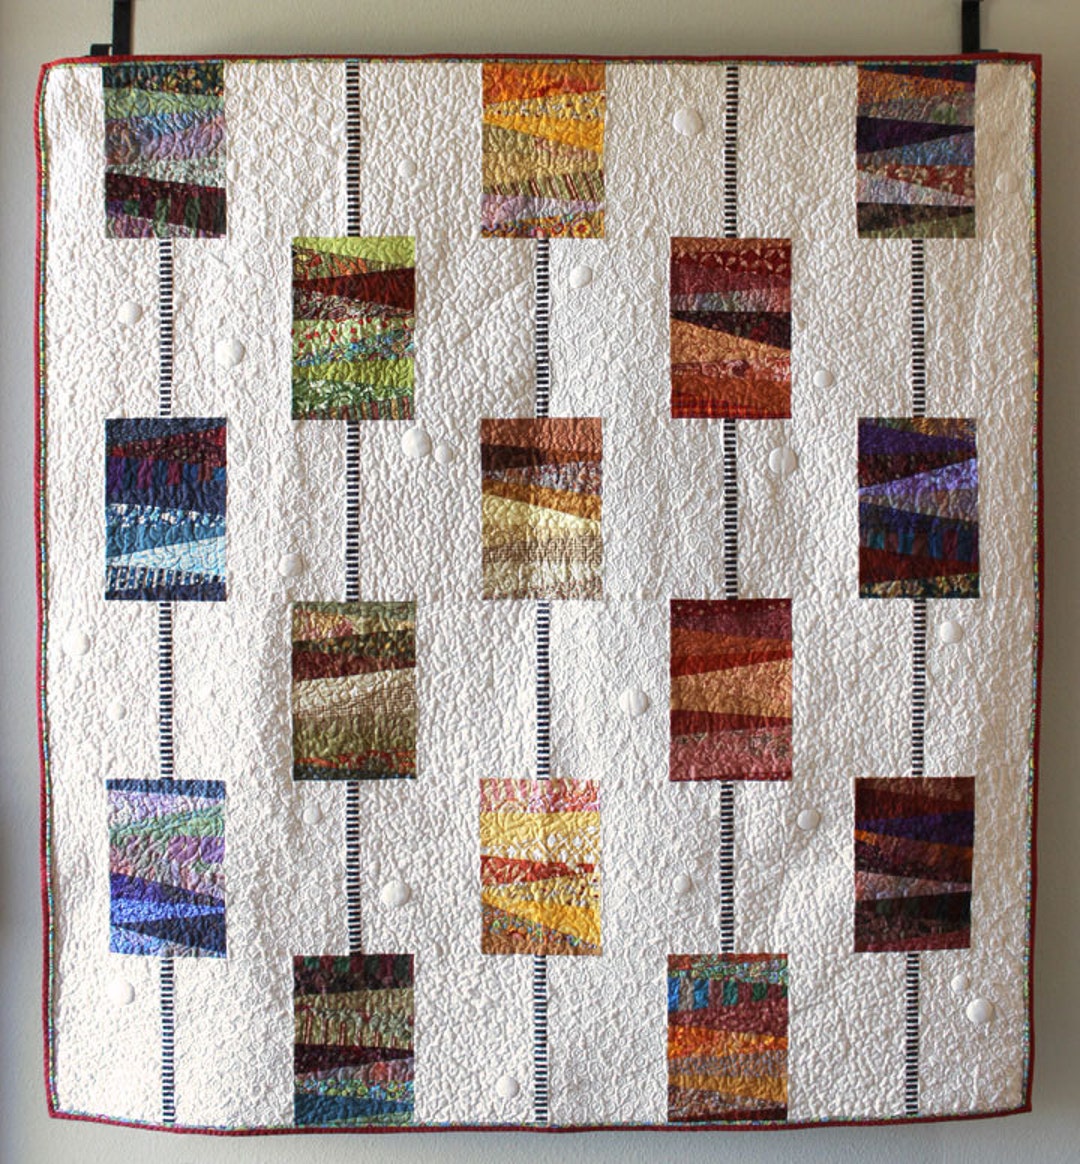 Gallery Sampler Quilt with Black Quilt Clips - Log House Craft Gallery